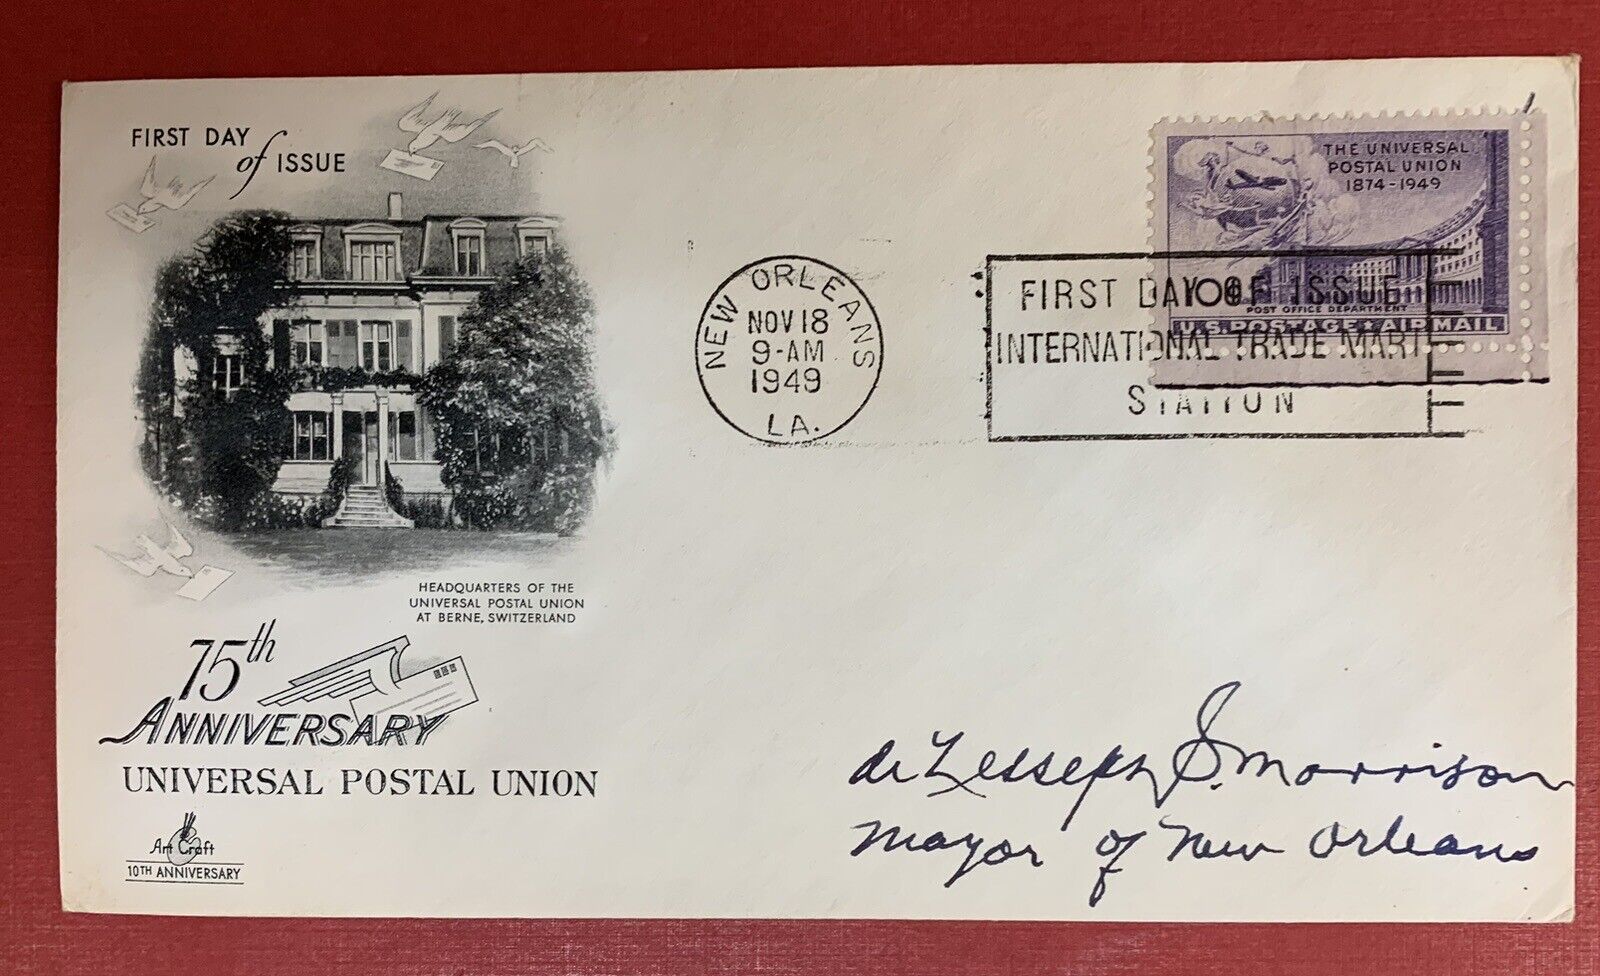 deLesseps Morrison,New Orleans Mayor, Autograph on Scott #C42 First Day Cover